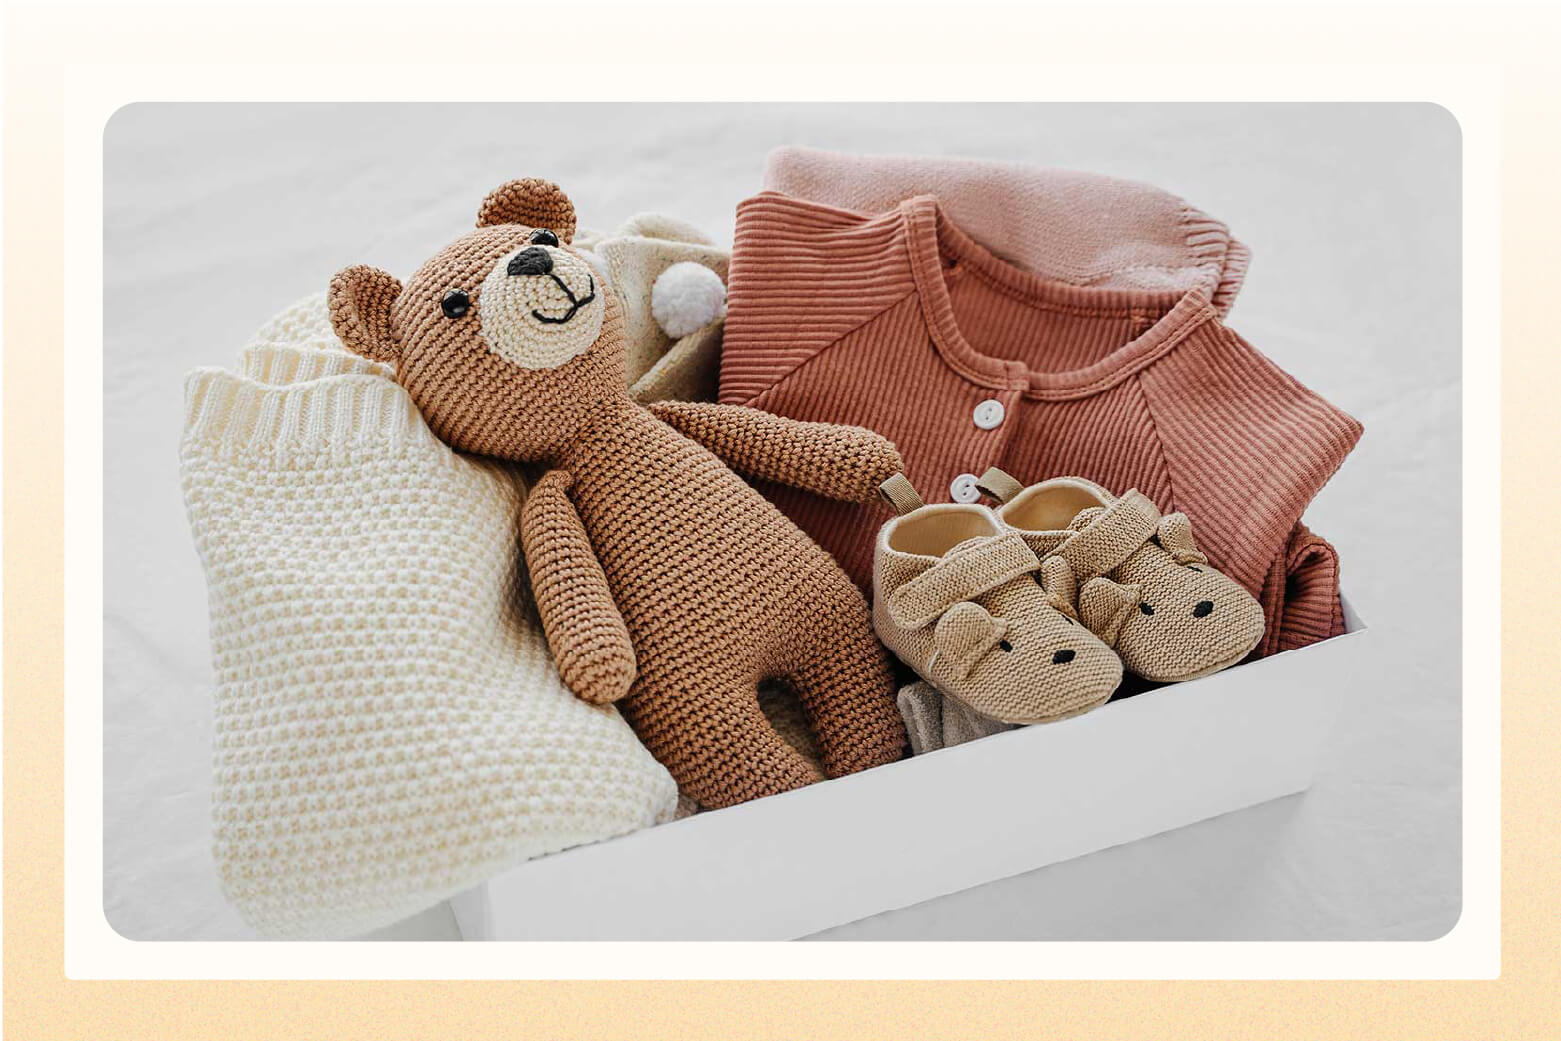 Box holding knitted baby clothes, tiny shoes, and a knitted teddy bear